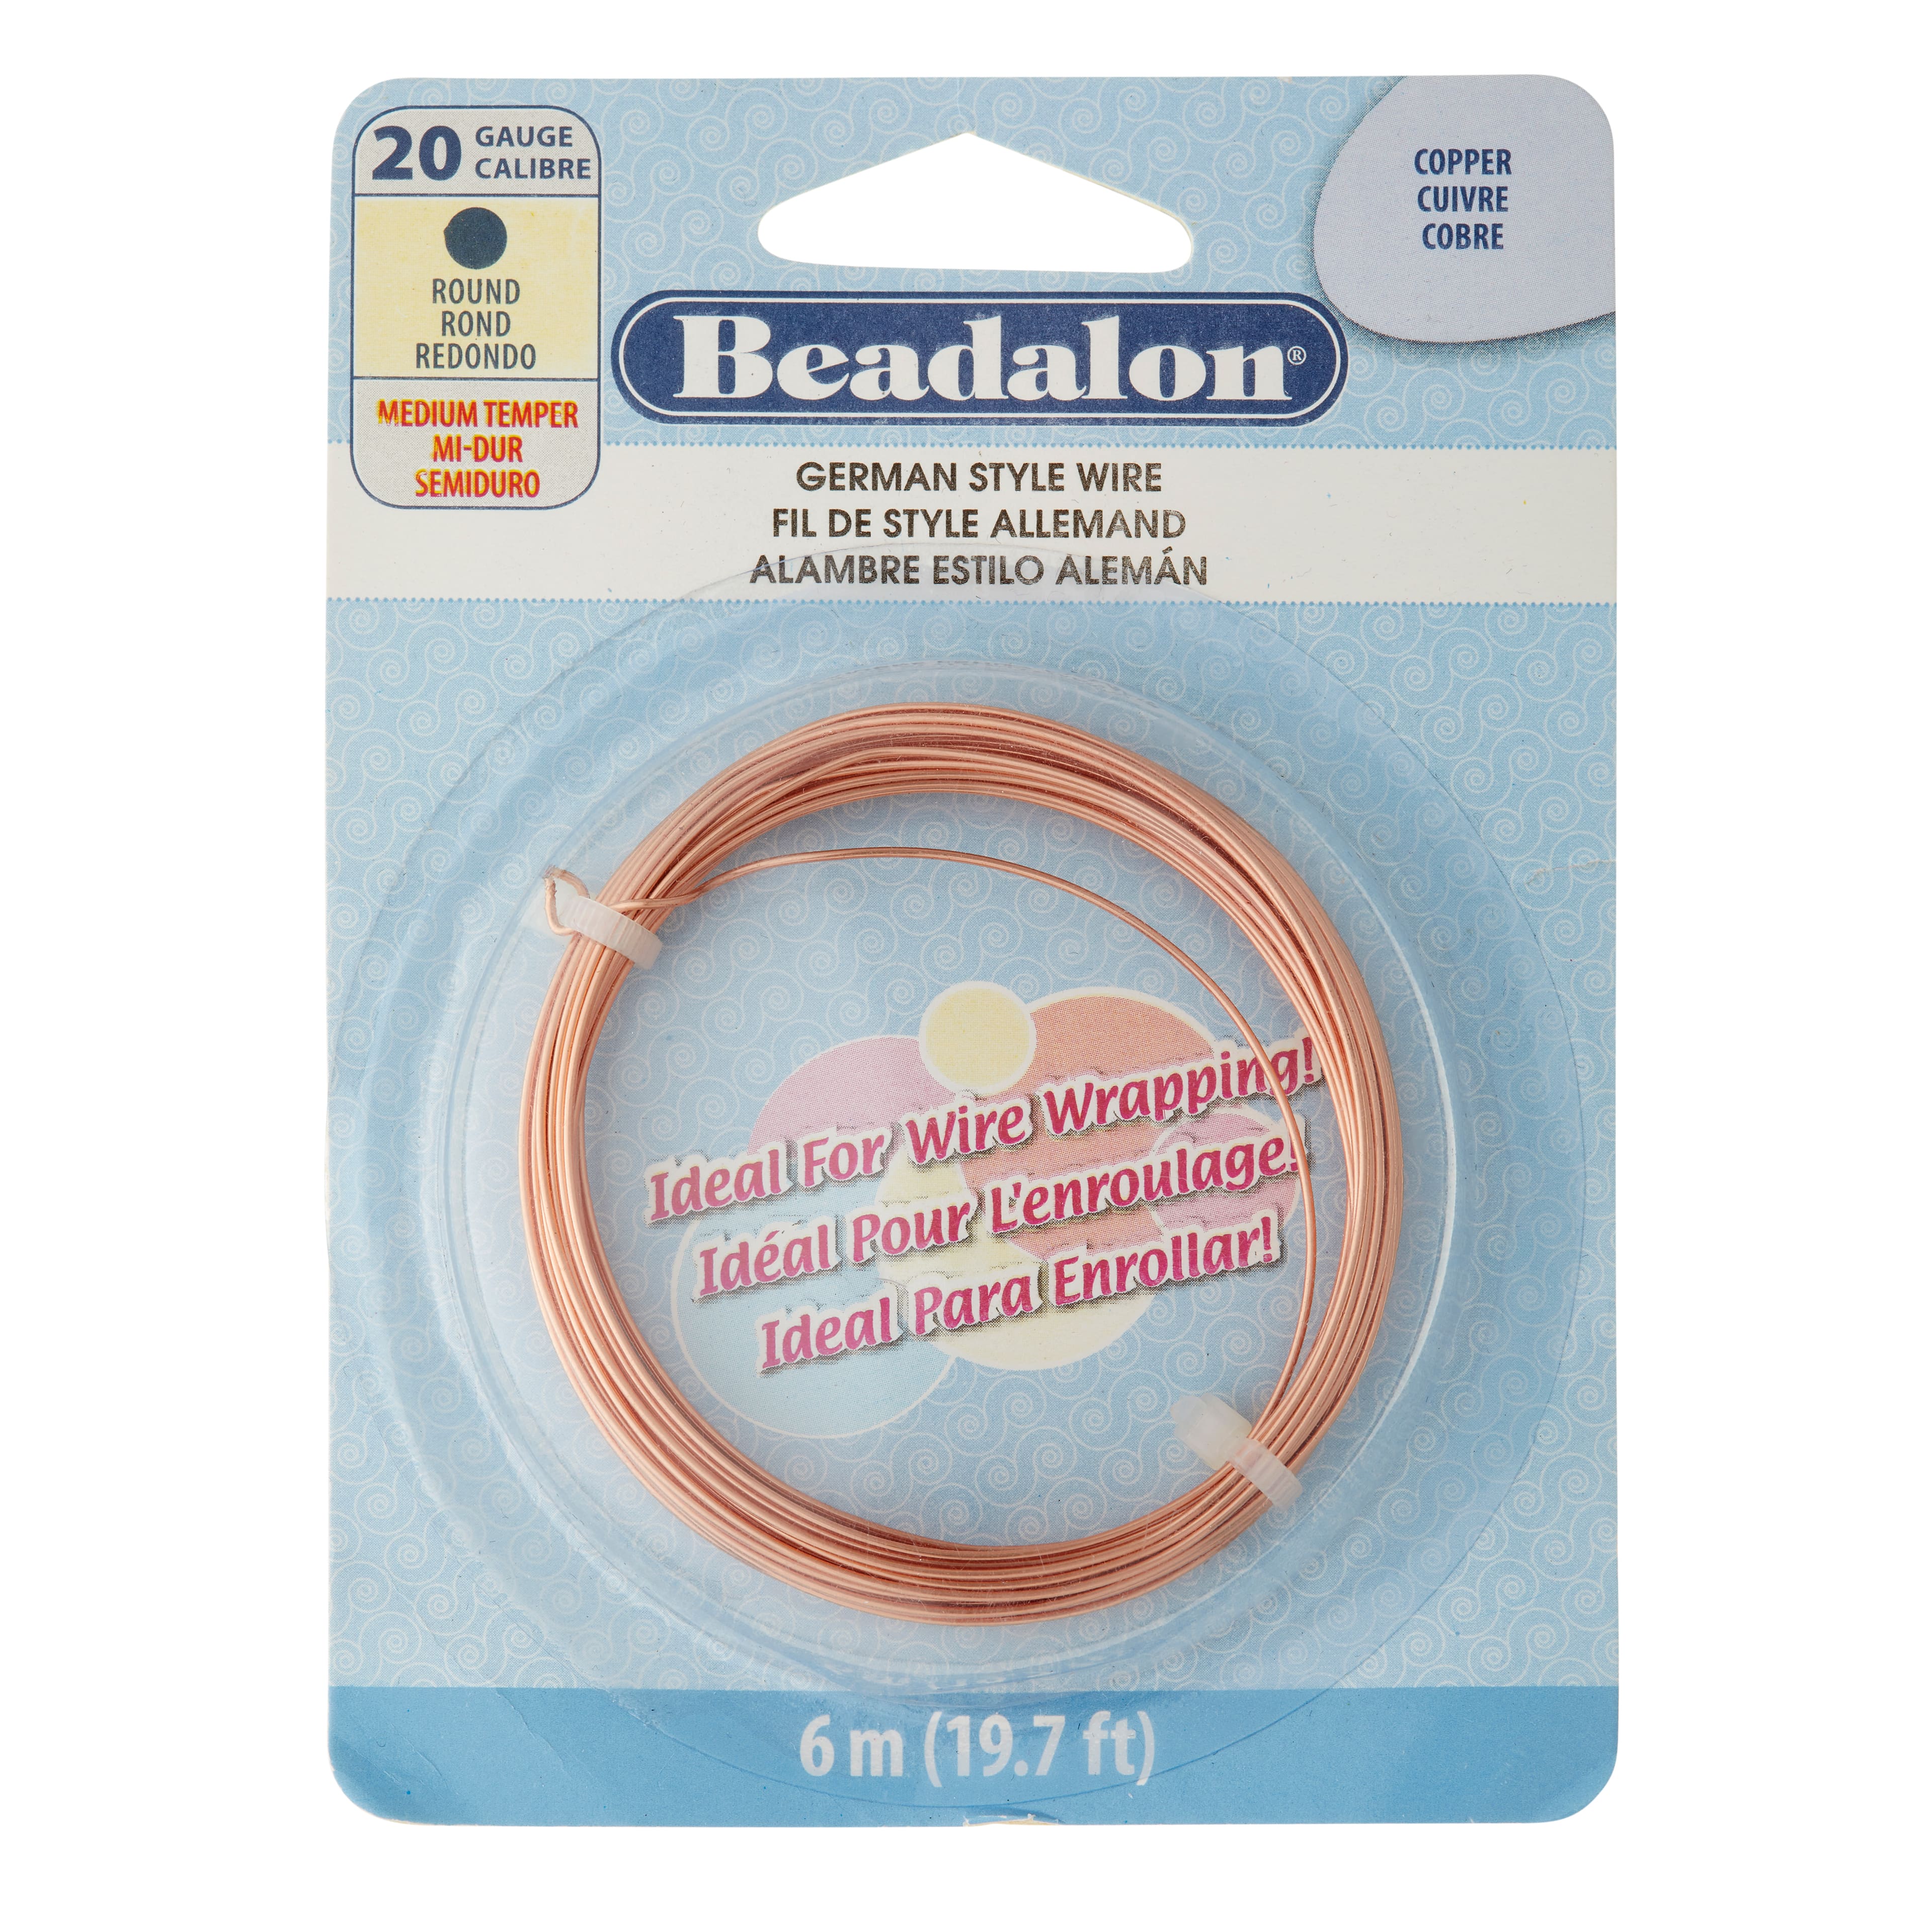 16 Gauge Gold Wire by Bead Landing | Michaels